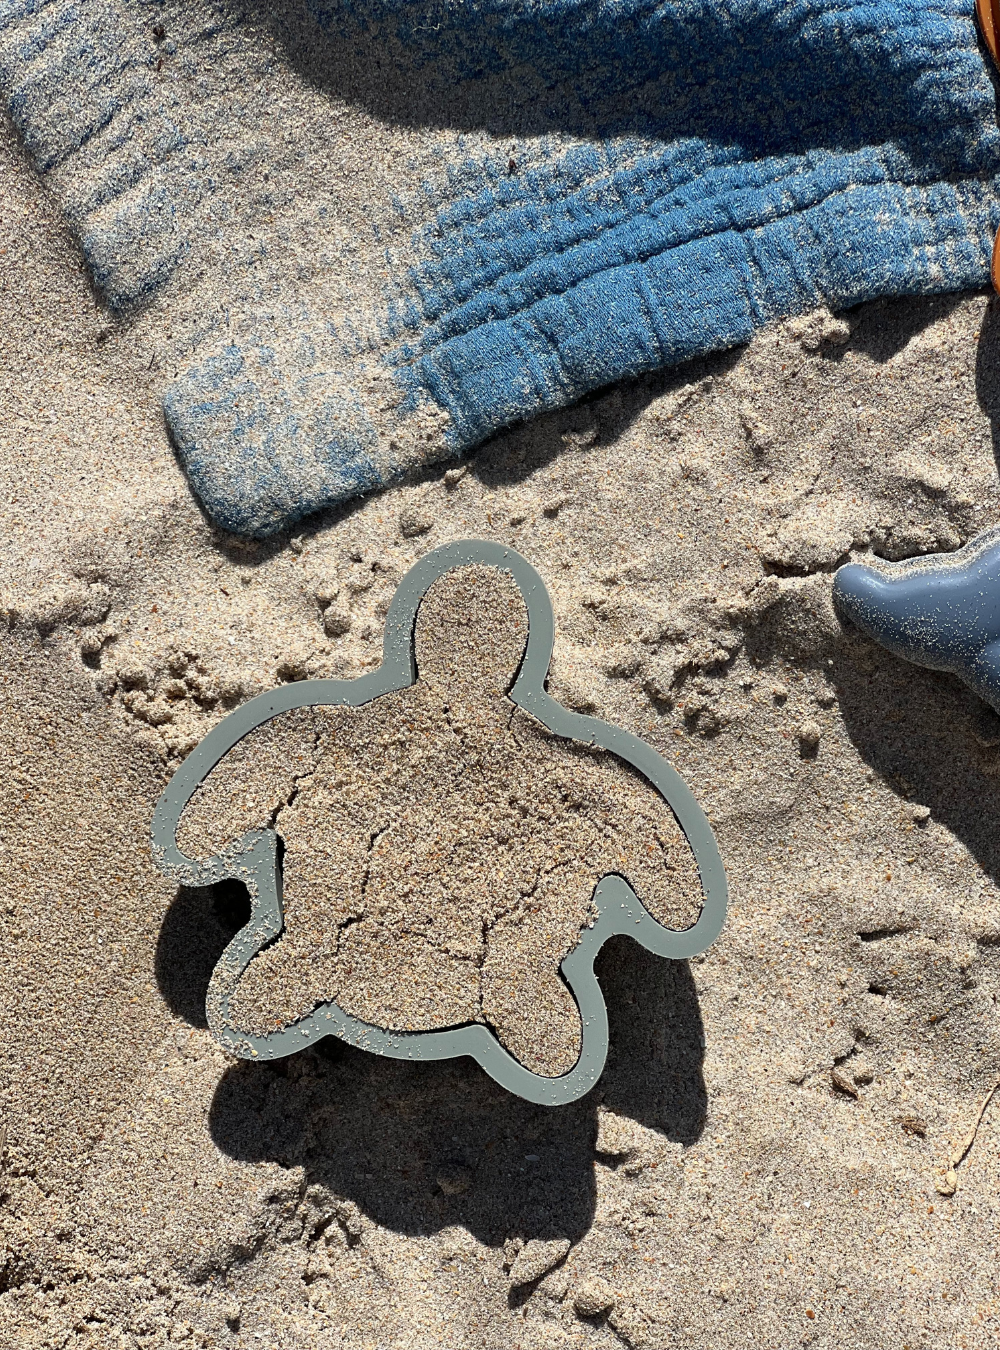 Beach Molds Are Here!